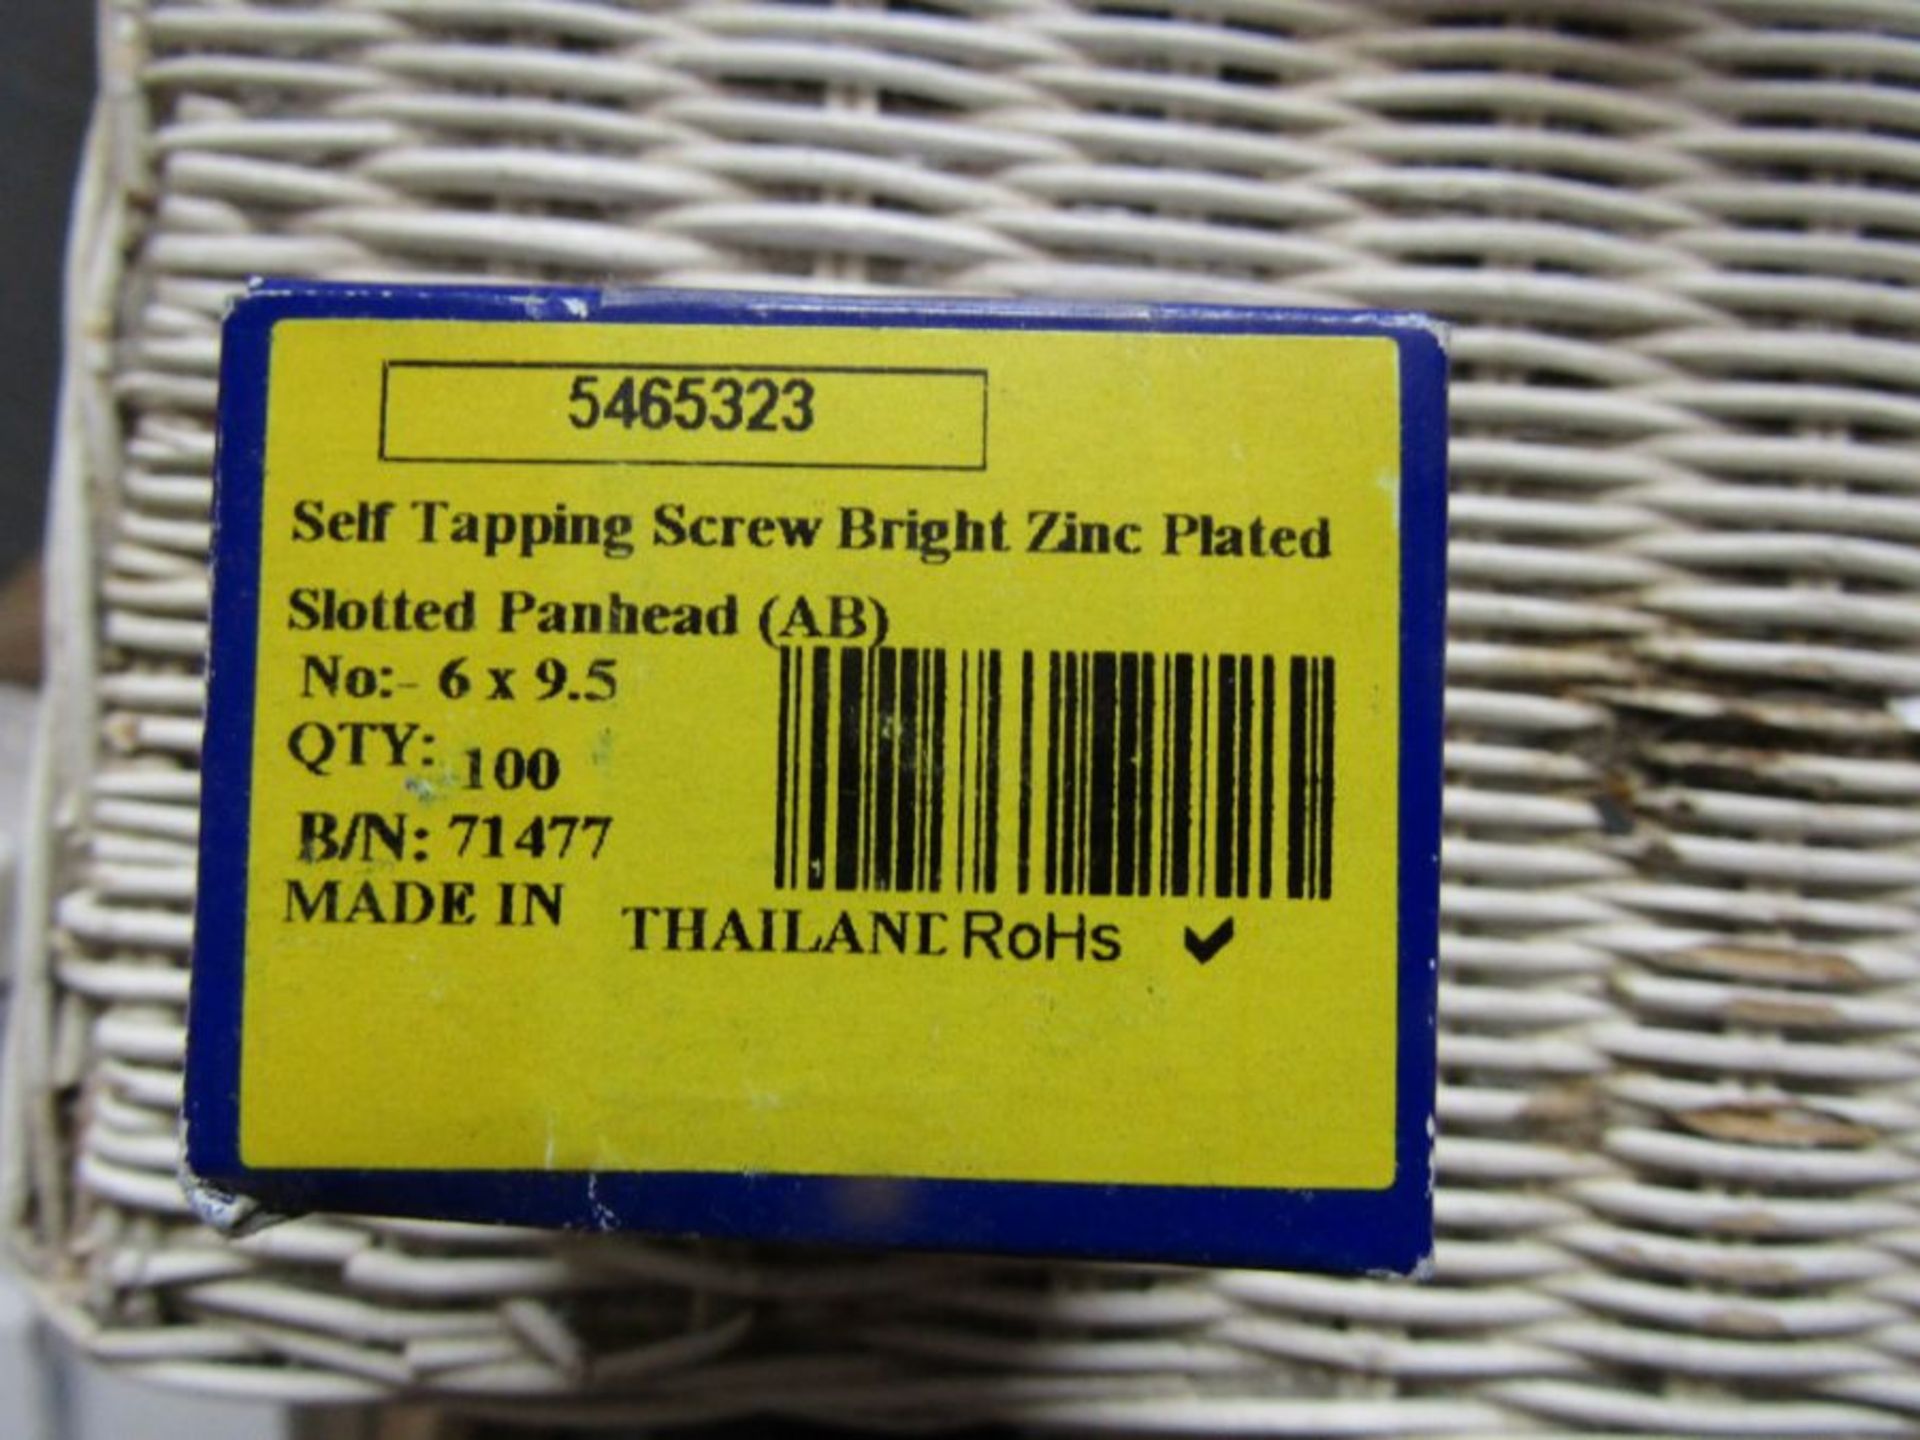 39 boxes of 100 Bright Zinc Plated Steel Pan Head Self Tapping Screw, No 6 x 9.5 5465323